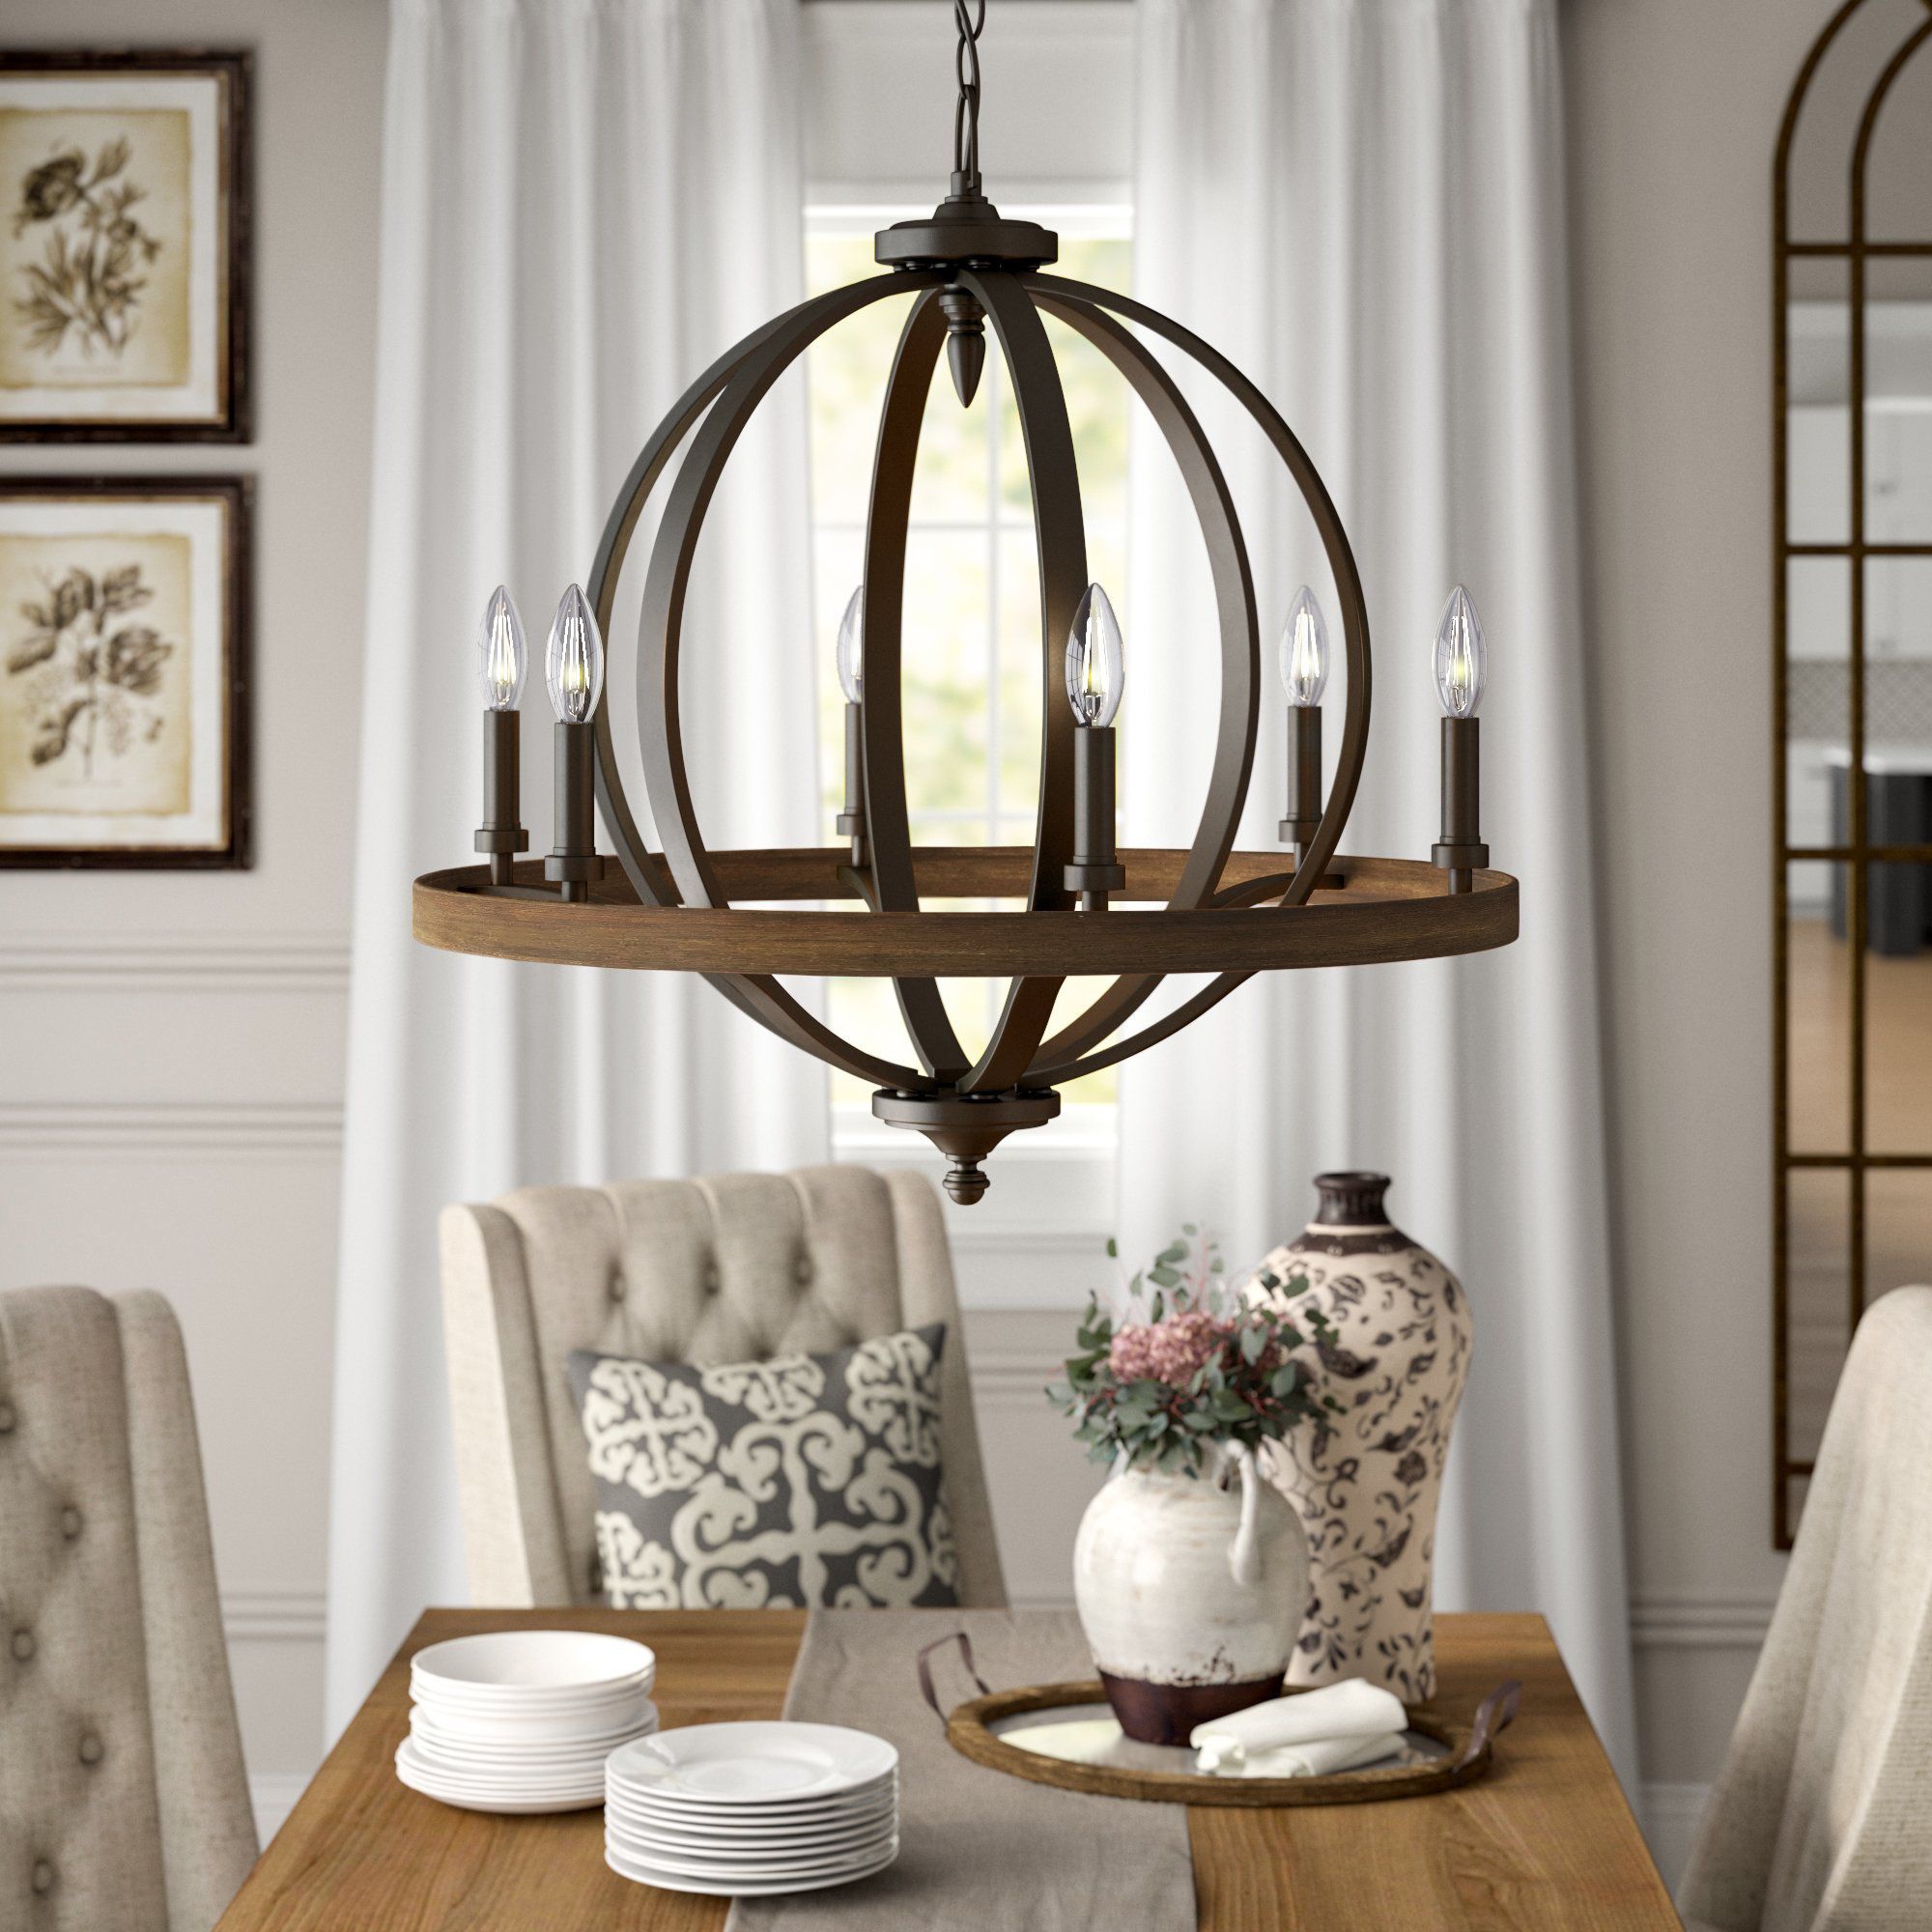 Bender 6 Light Candle Style Chandelier With Regard To Ricciardo 4 Light Globe Chandeliers (View 15 of 30)